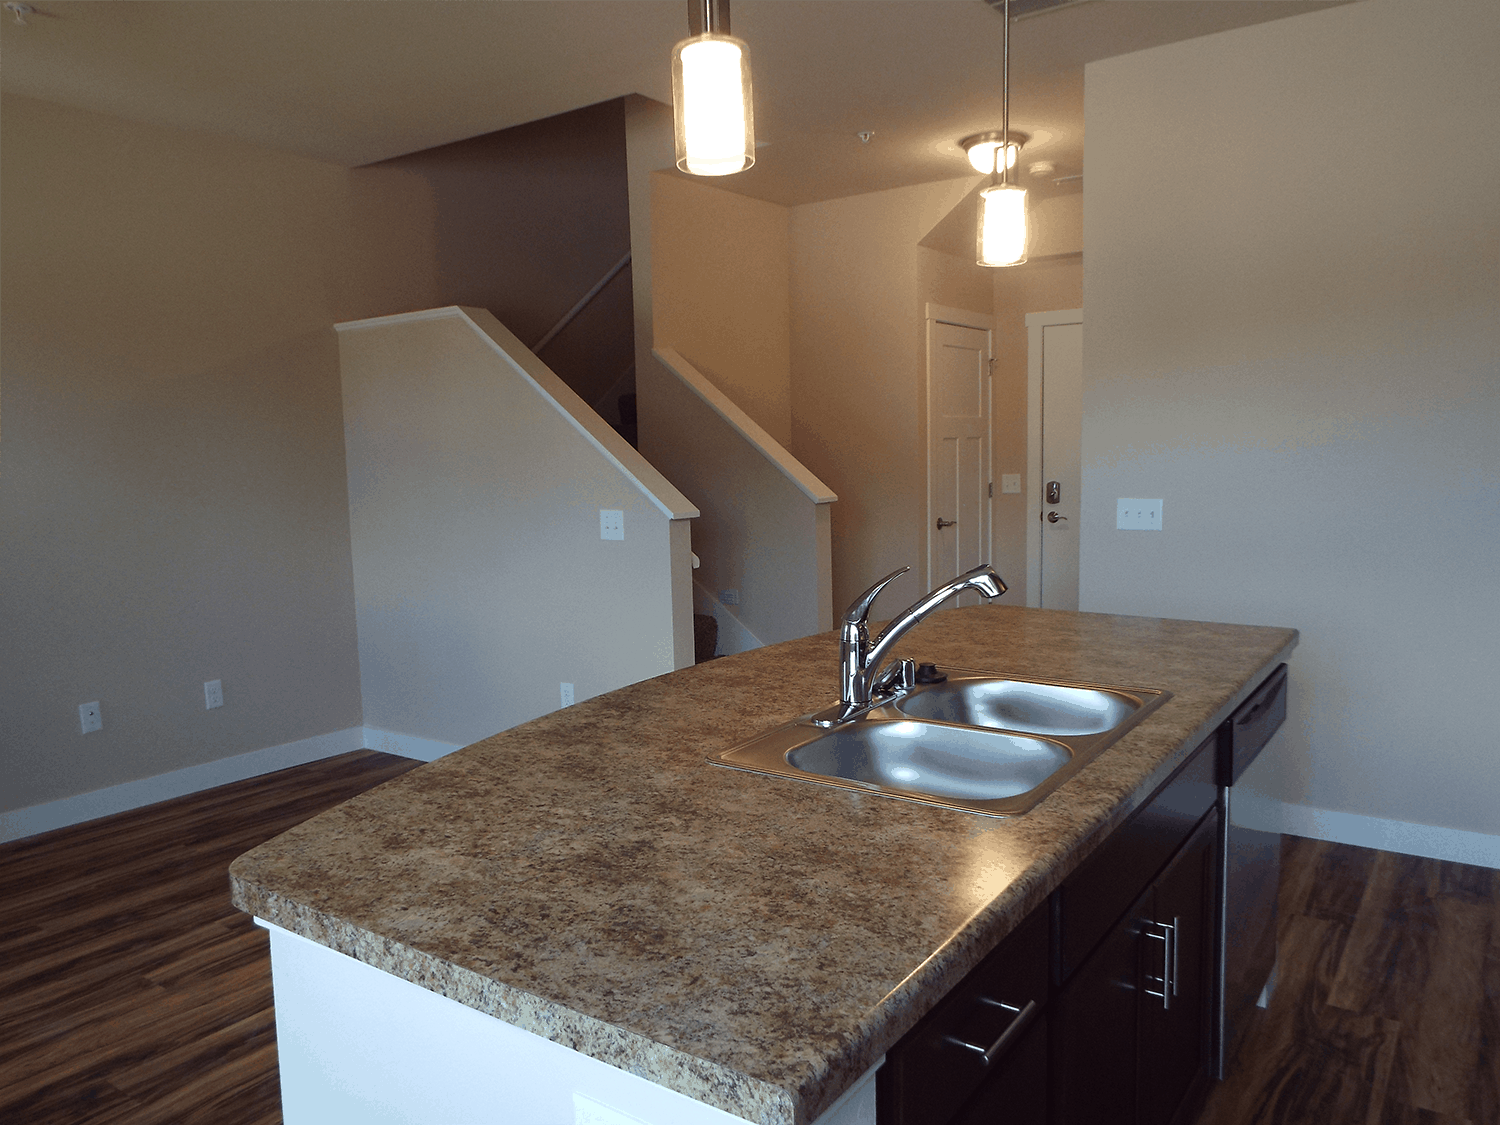 Townhomes kitchen Sink area